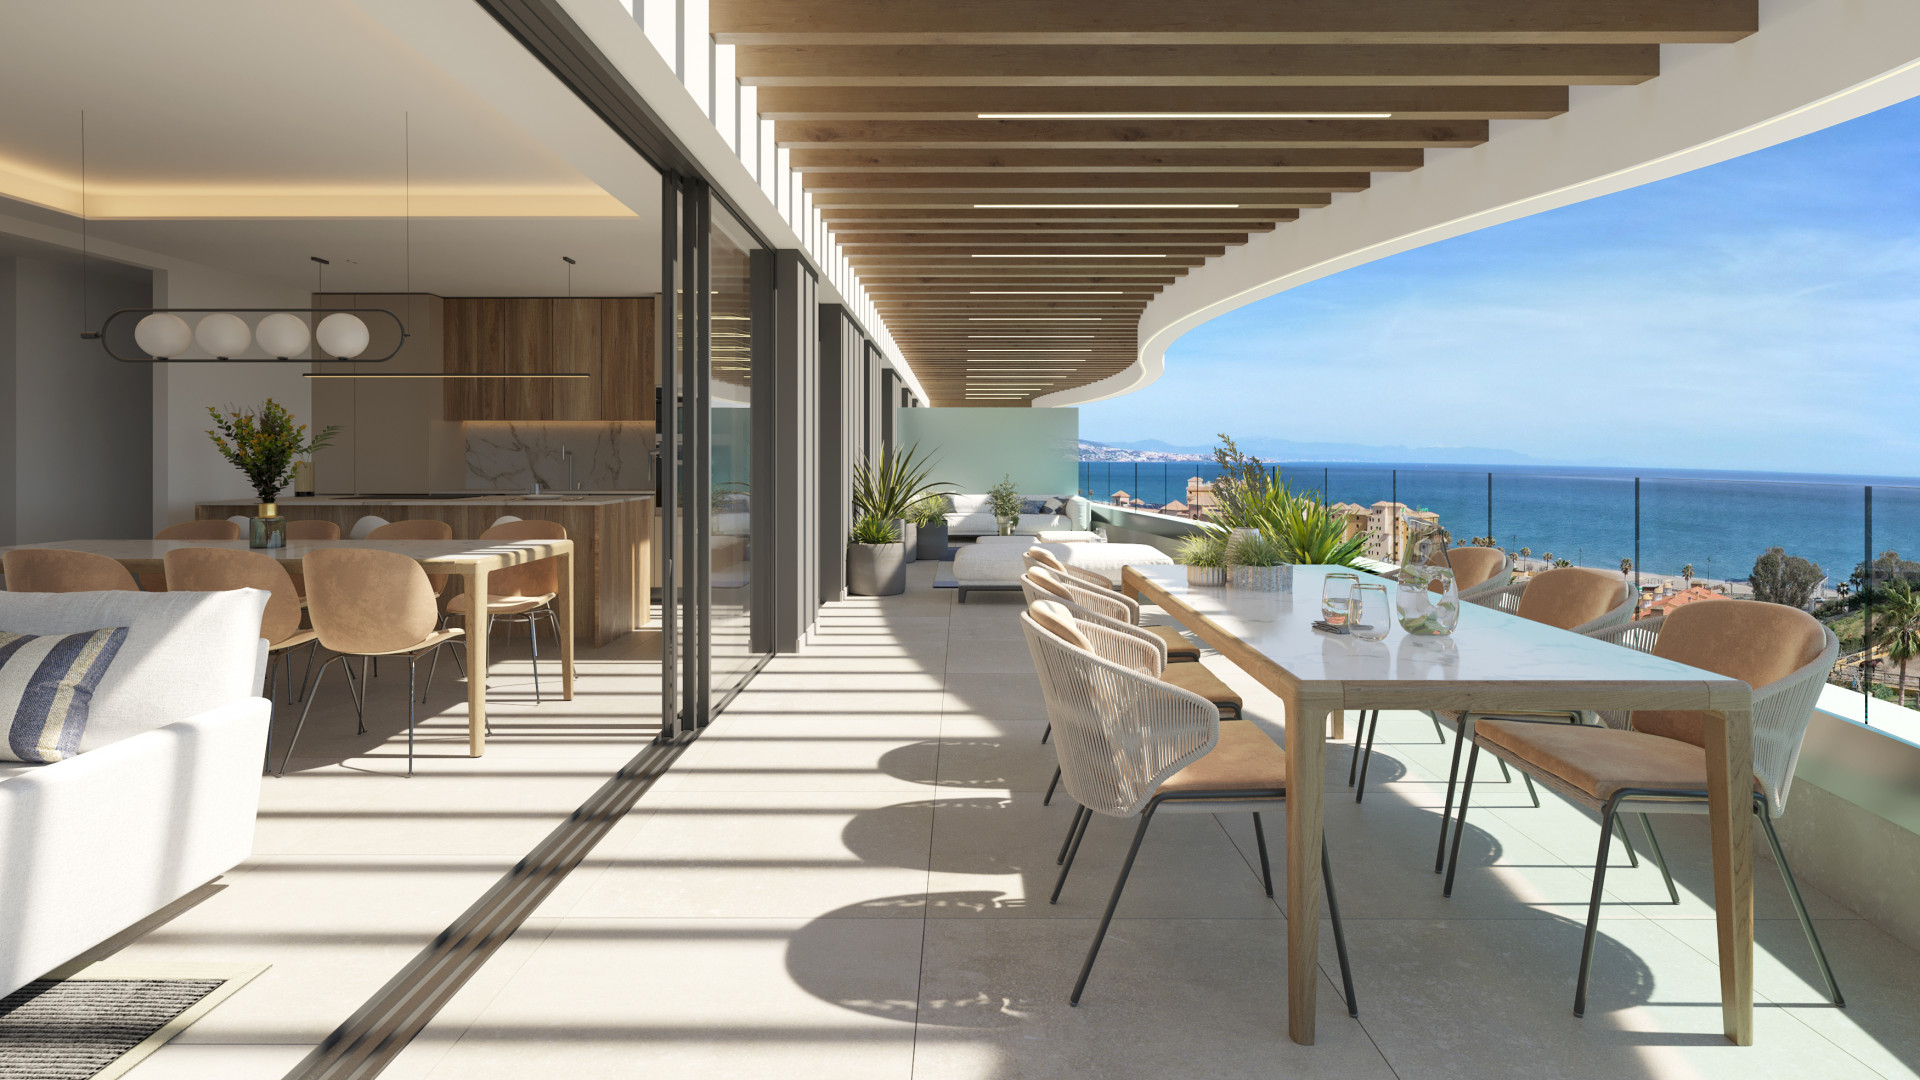 Off plan boutique complex of modern apartments by the sea in Mijas Costa - Fuengirola